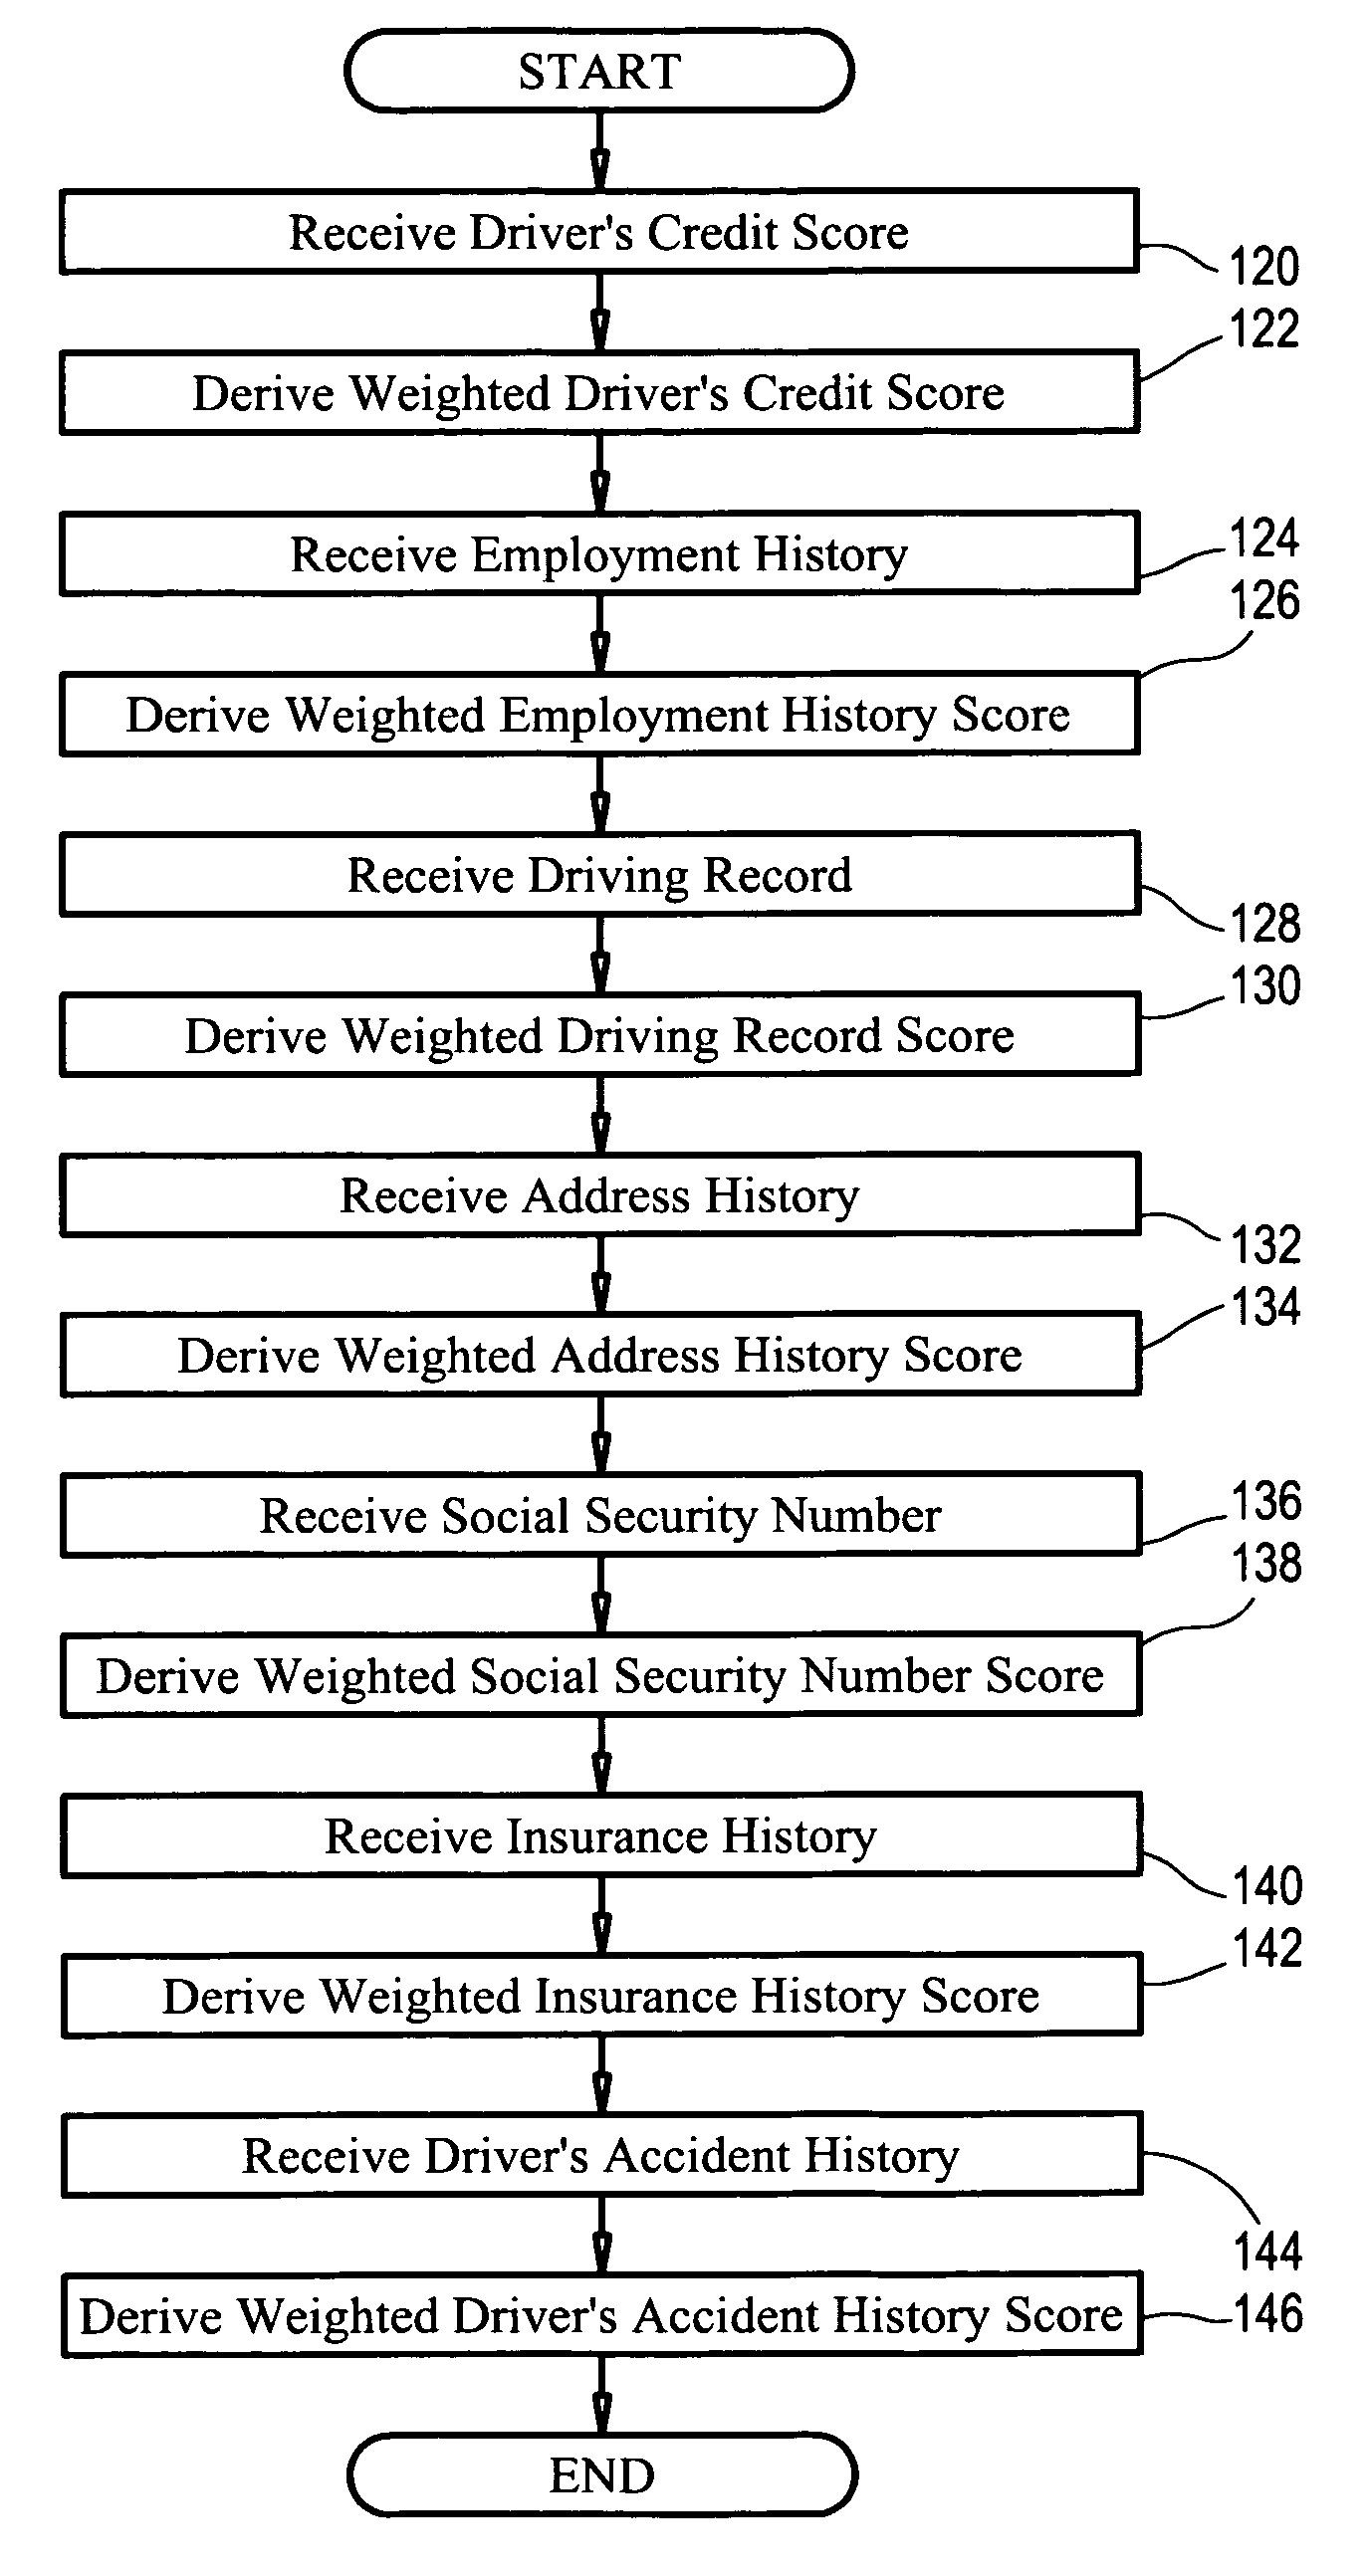 System and method for determining an objective driver score